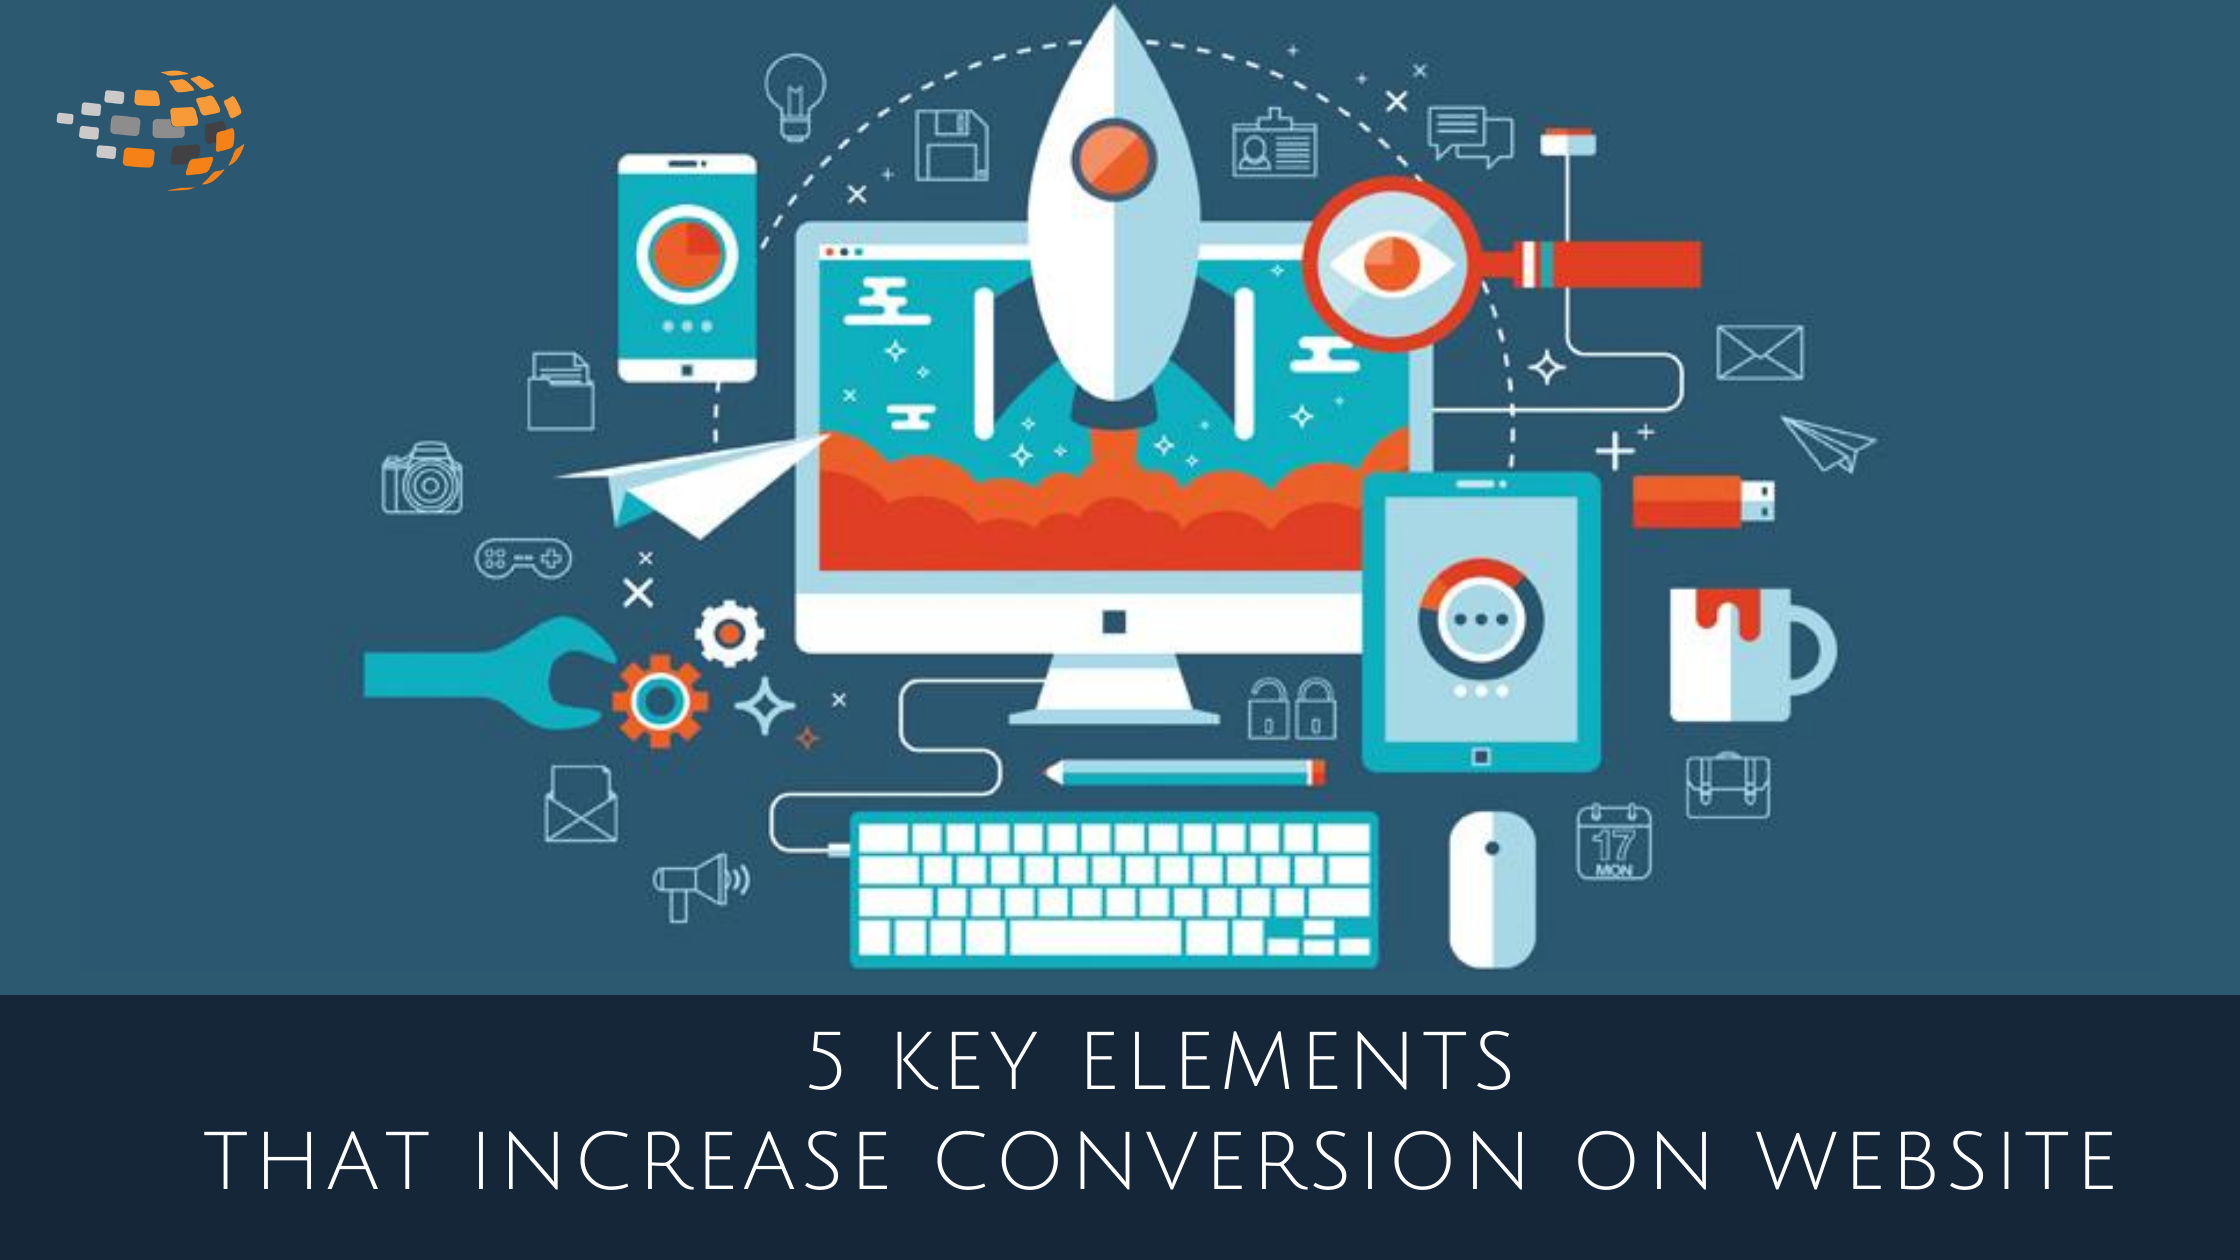 5 key elements that increase conversion on website